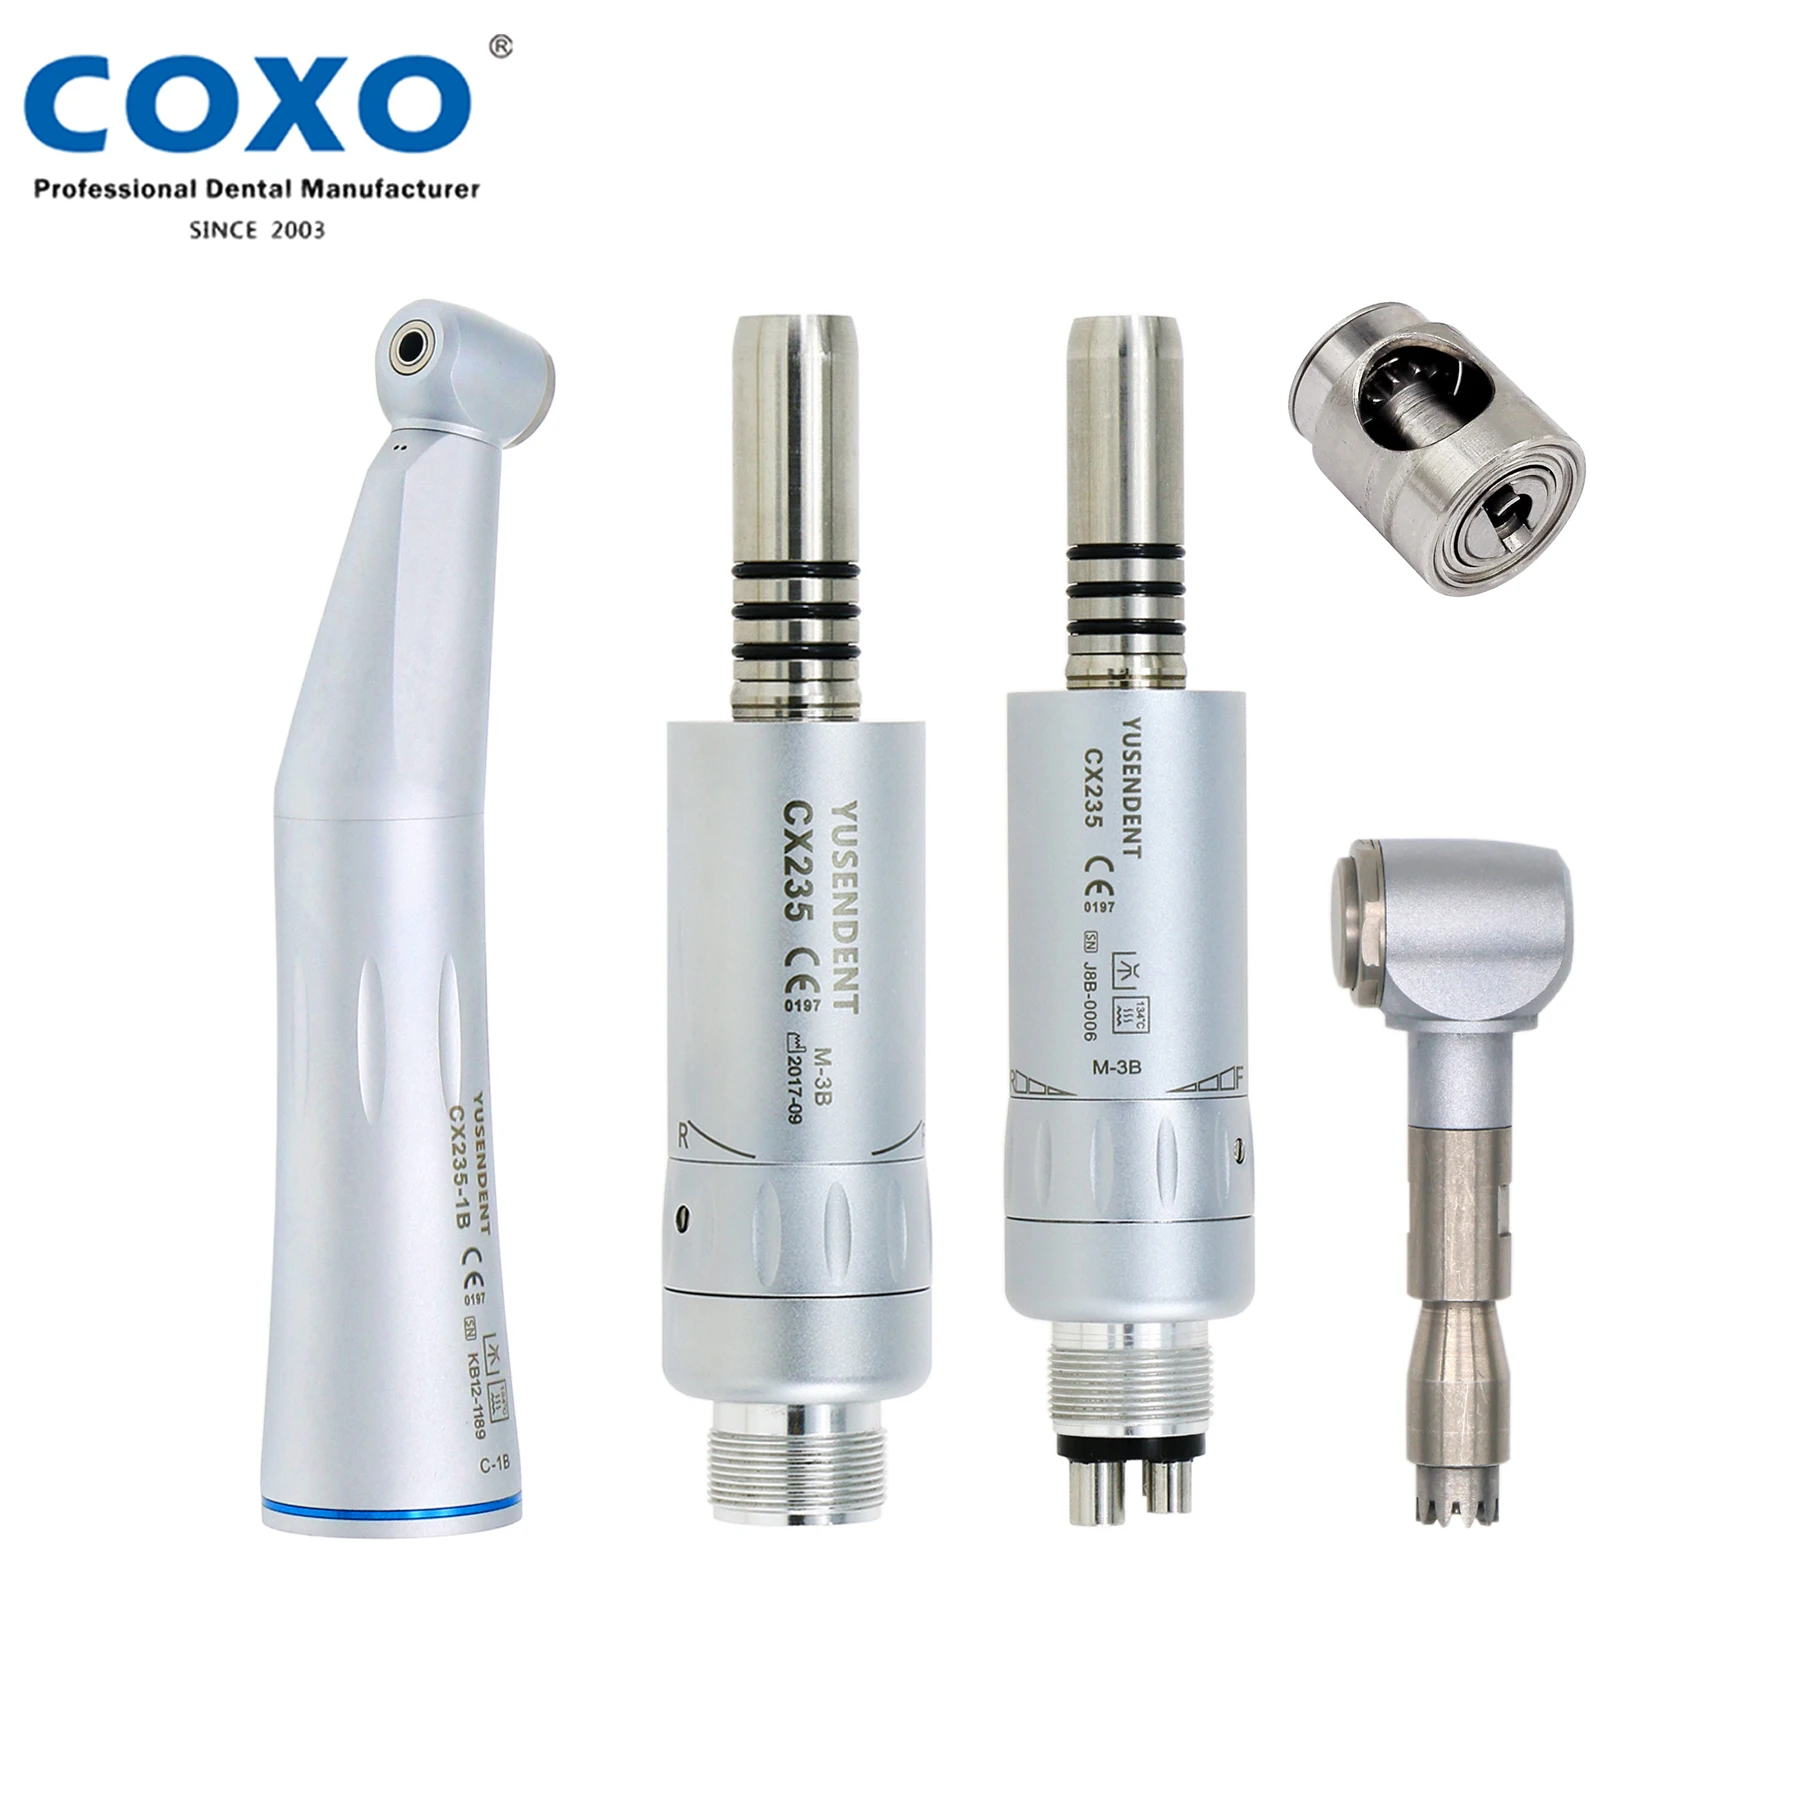 

COXO YUSENDENT Dental 1:1 Contra Angle Low Speed Handpiece Push Button Internal Water Spray 2/4 Holes E Type Fit NSK KAVO